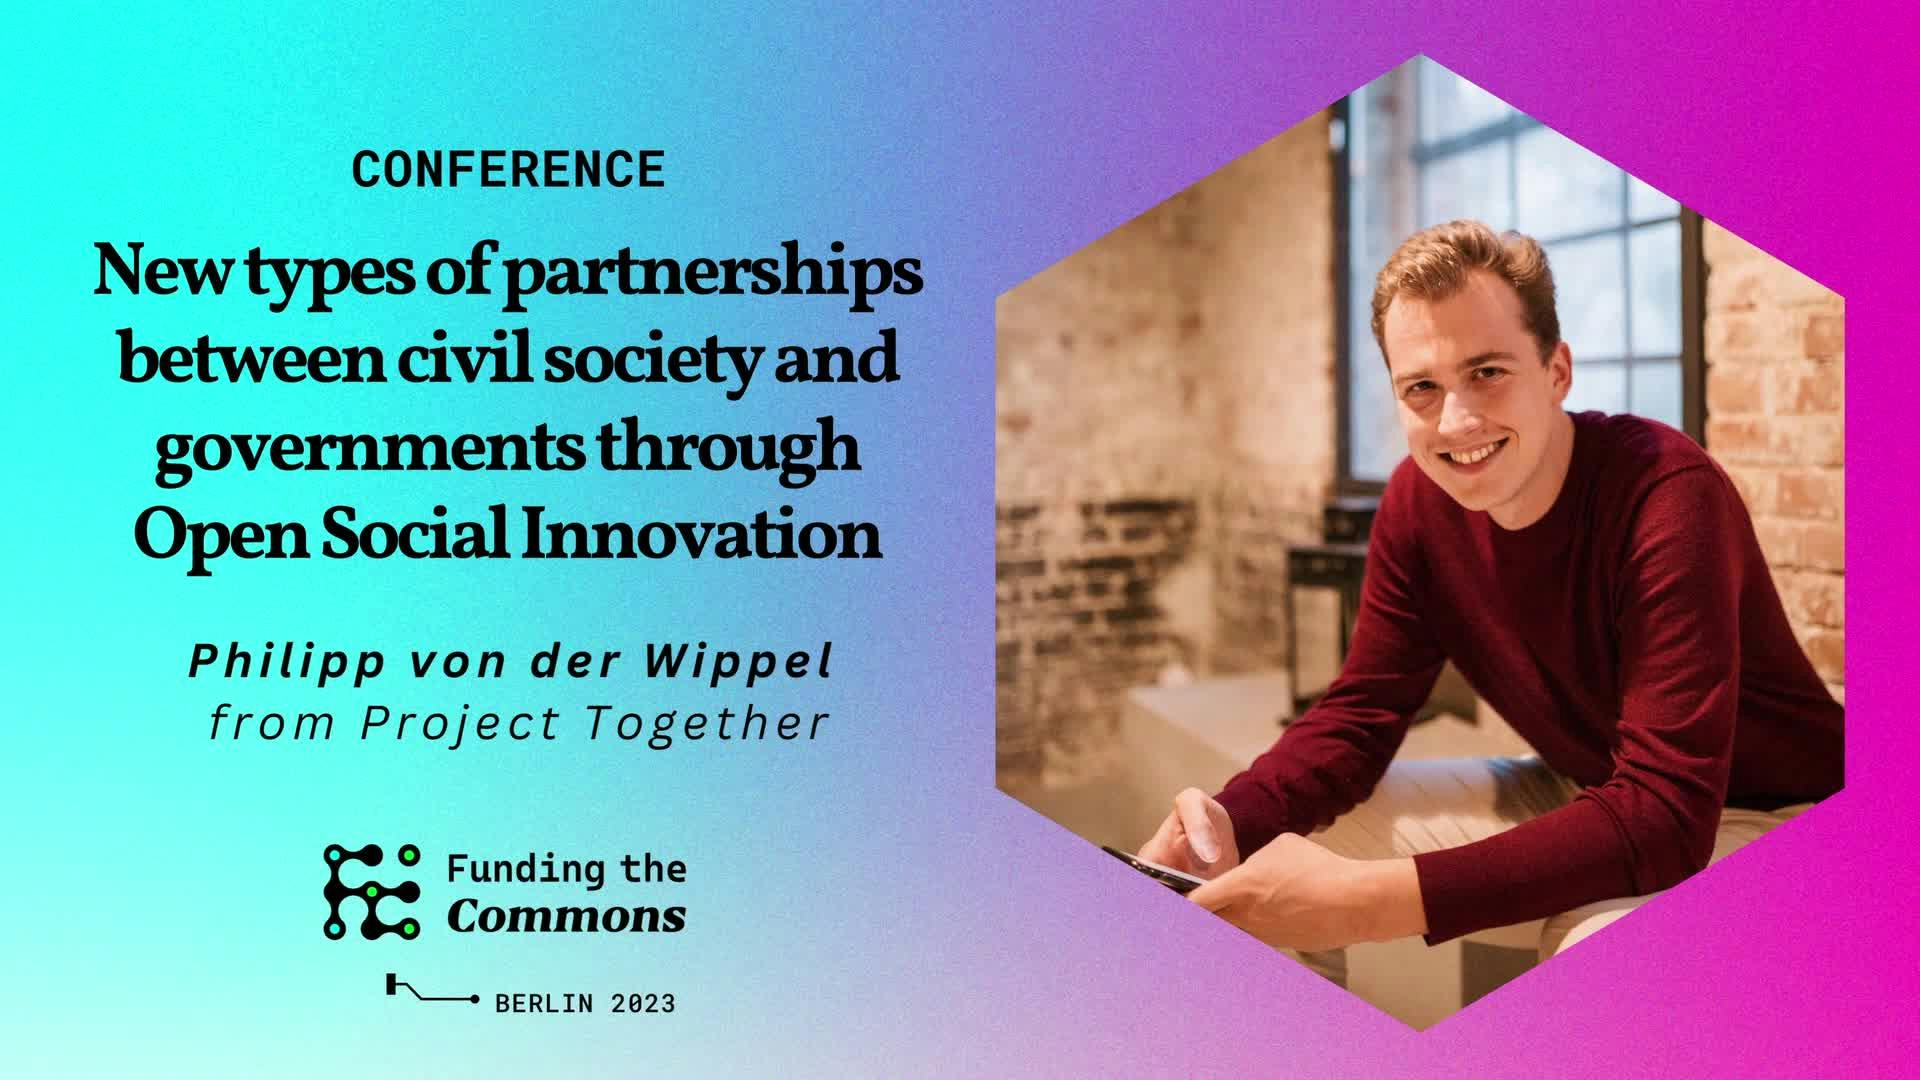 New types of partnerships between civil society and governments through Open Social Innovation